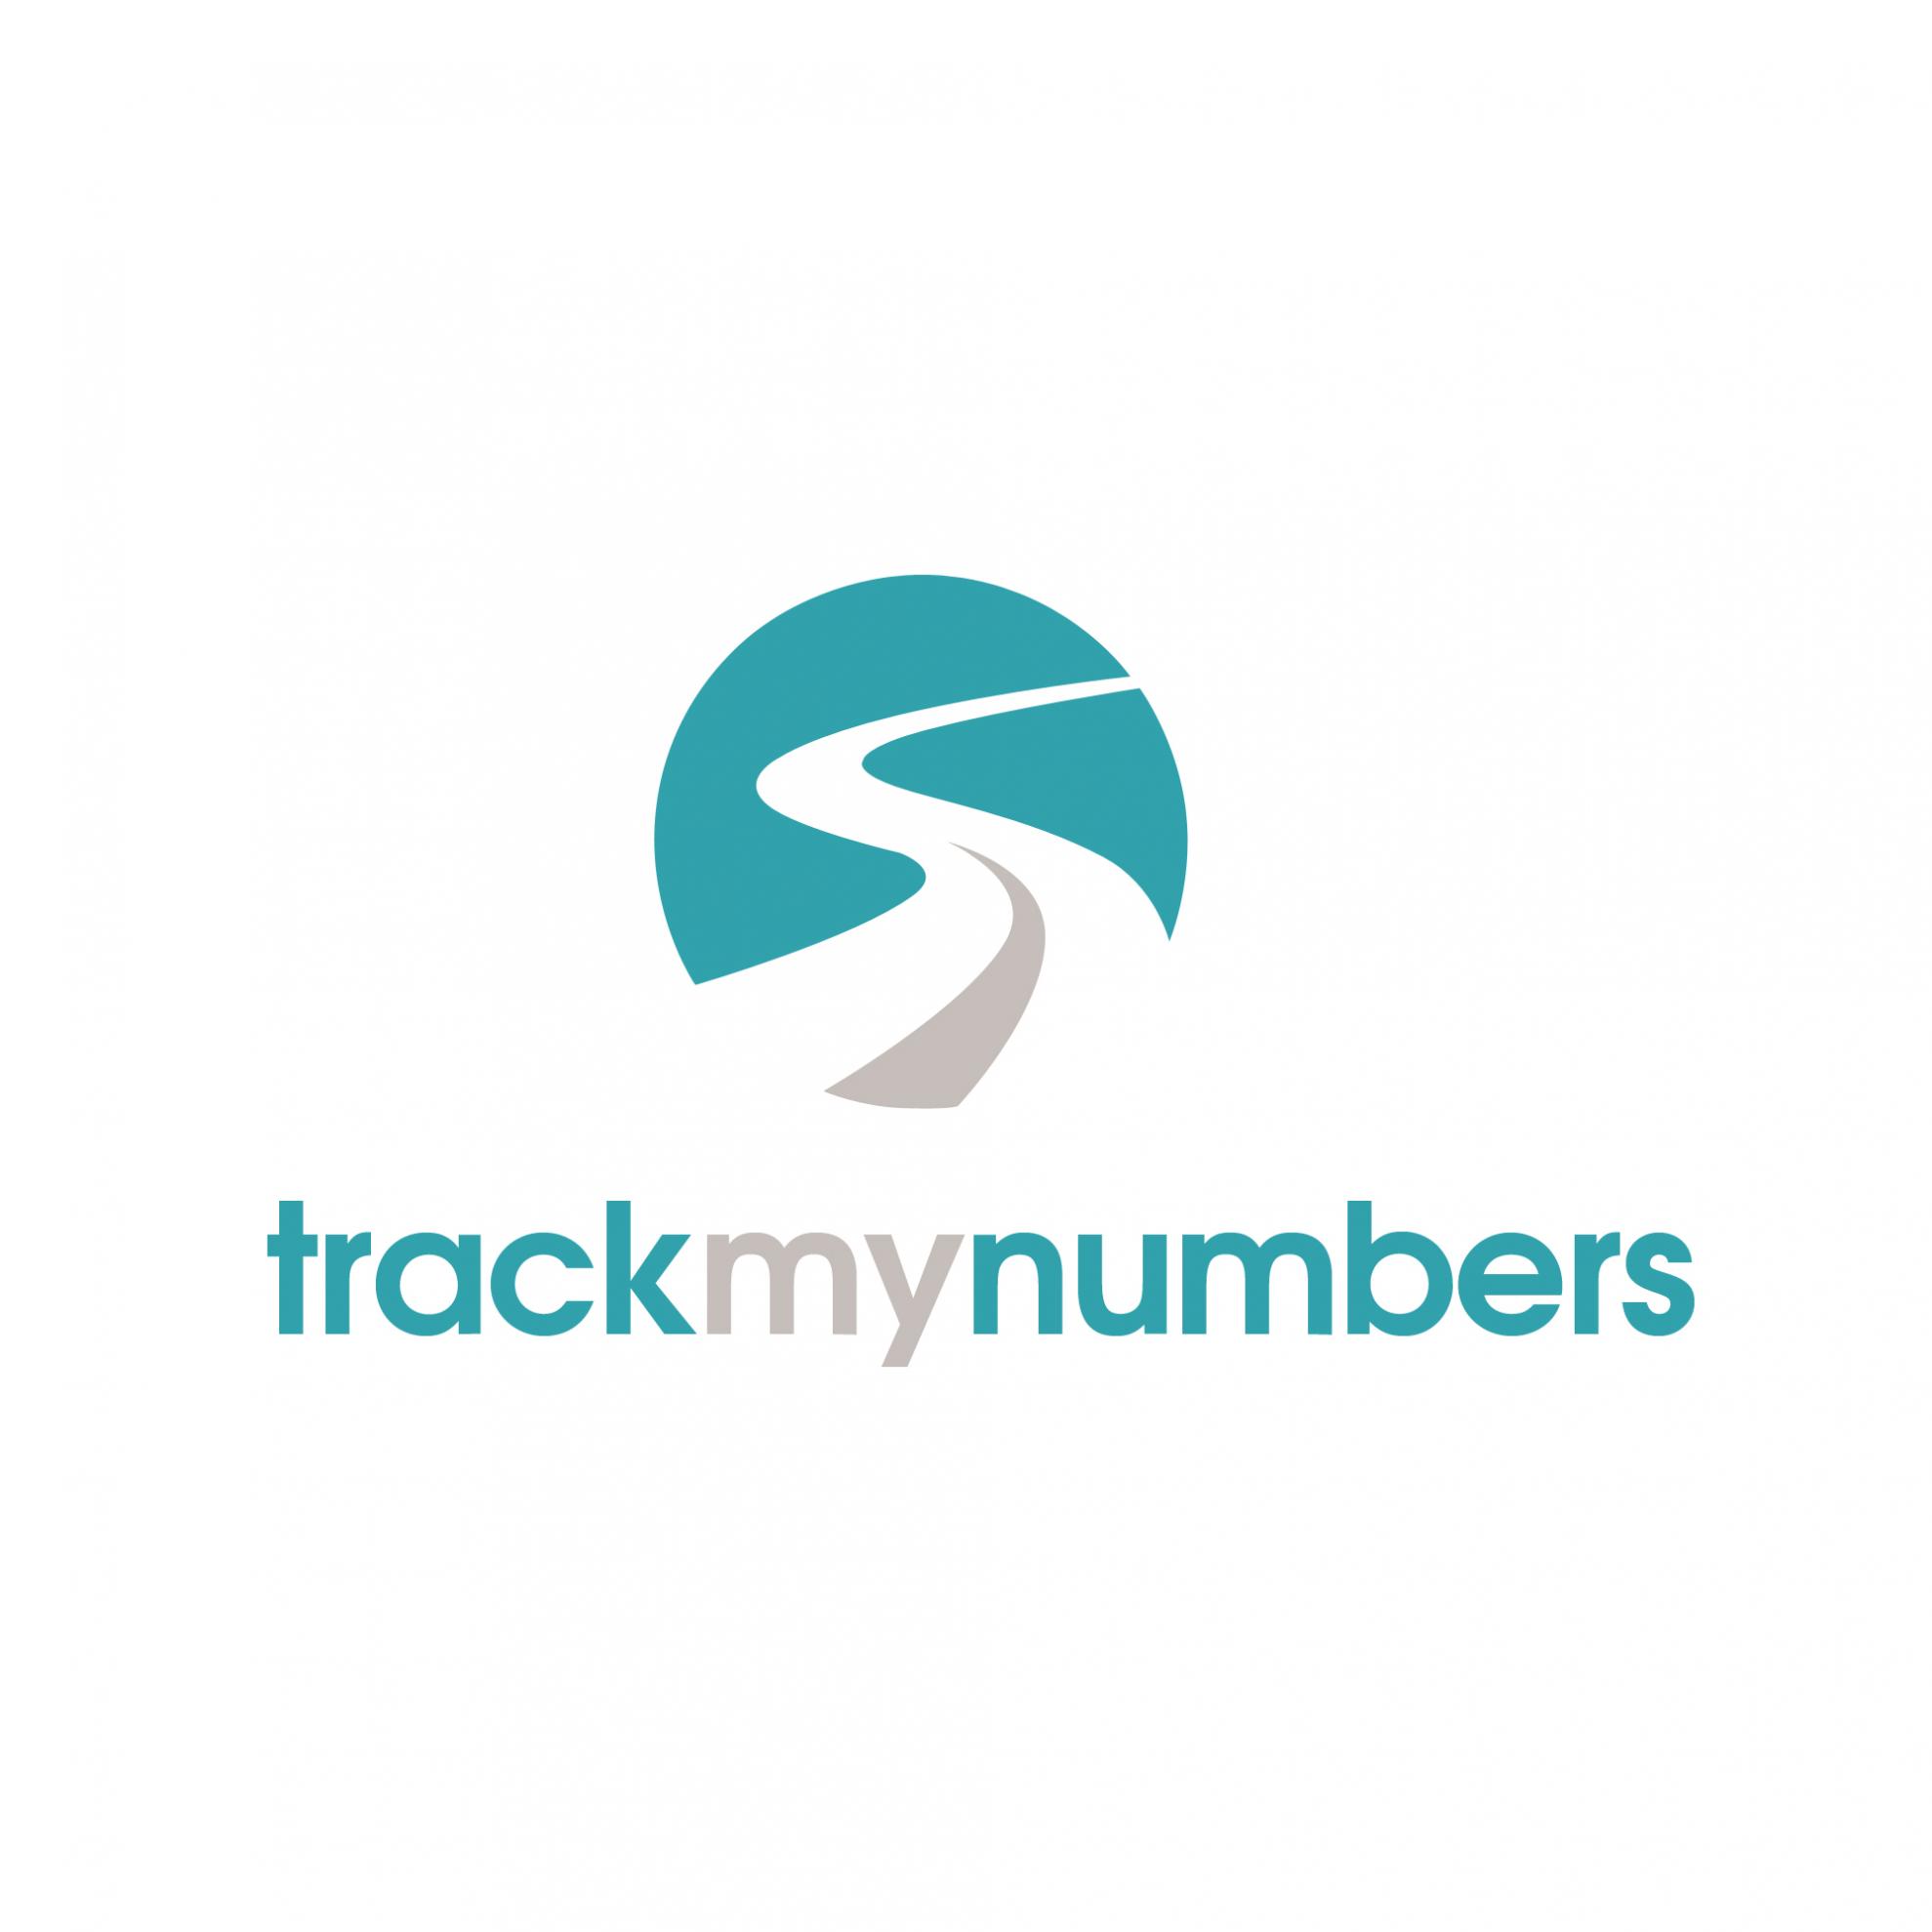 trackmynumbers Logo